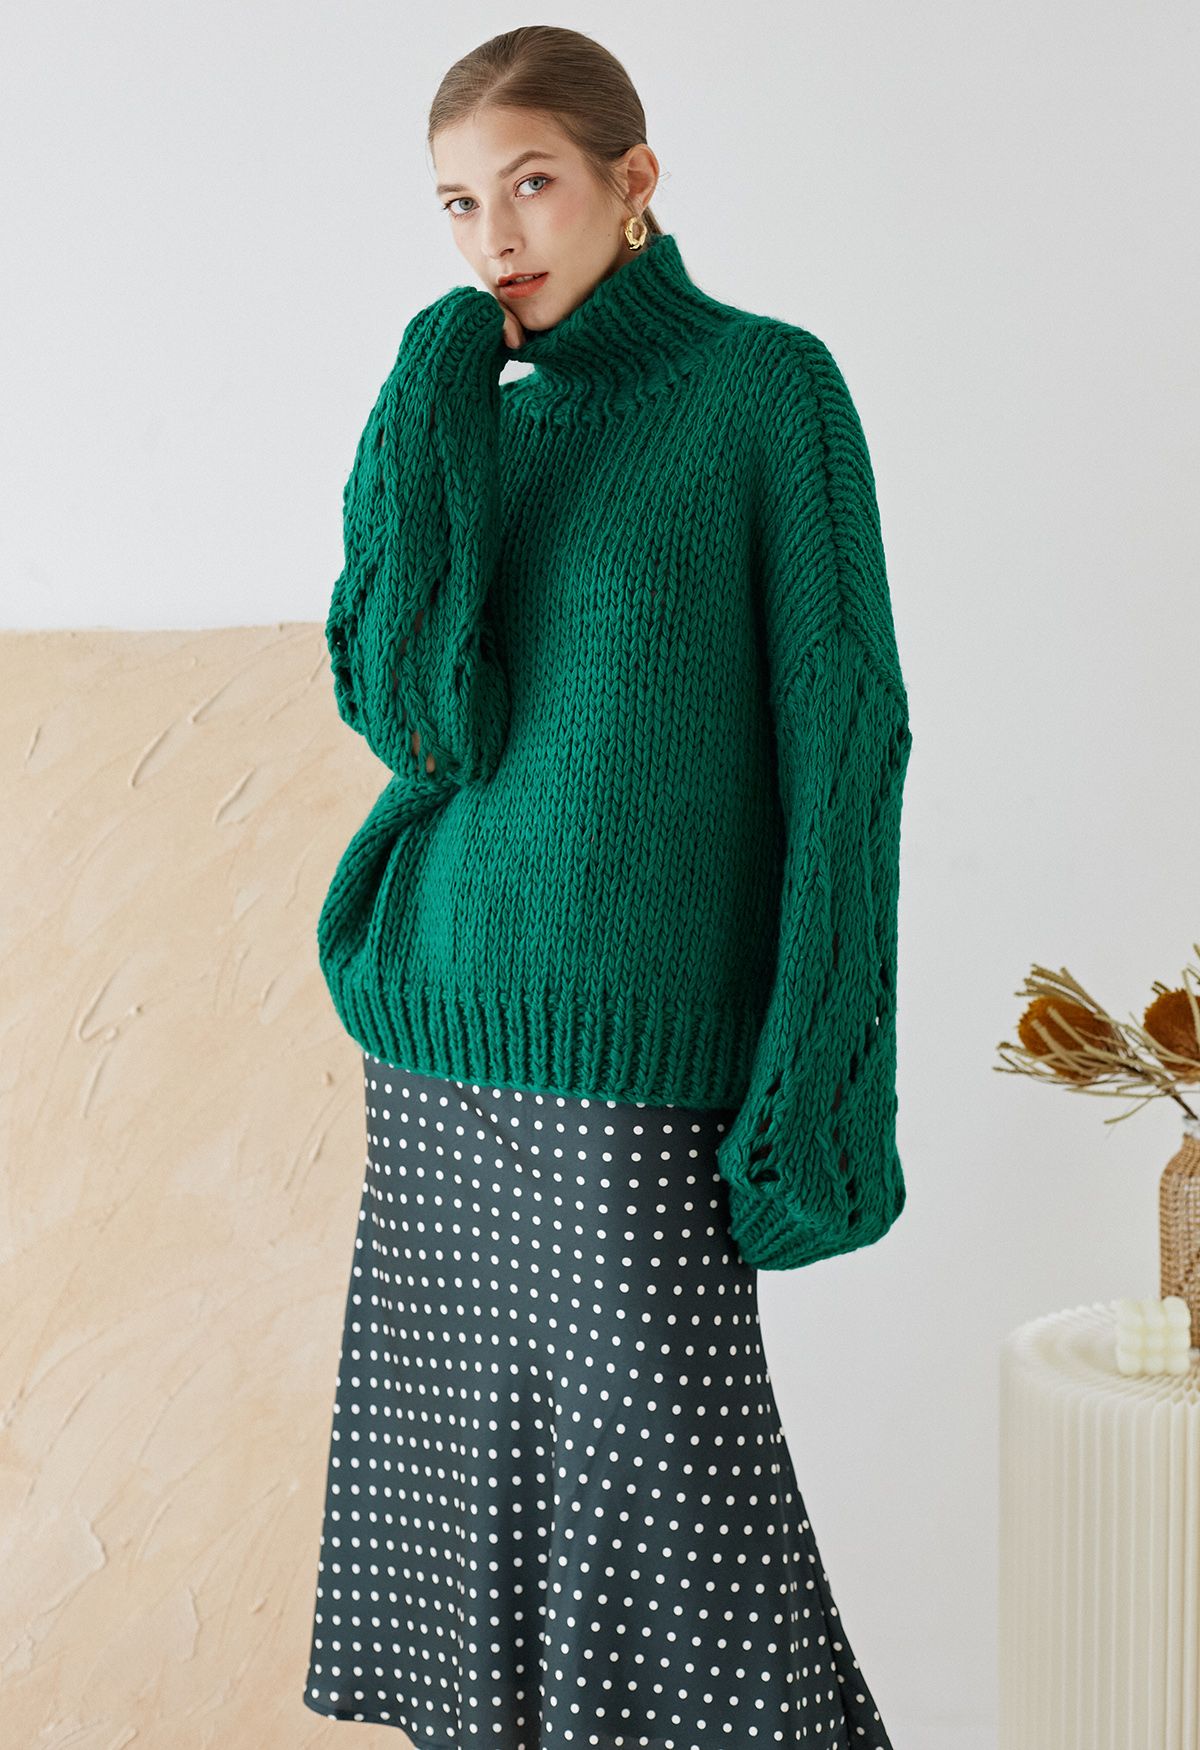 Pointelle Sleeve High Neck Hand-Knit Sweater in Green